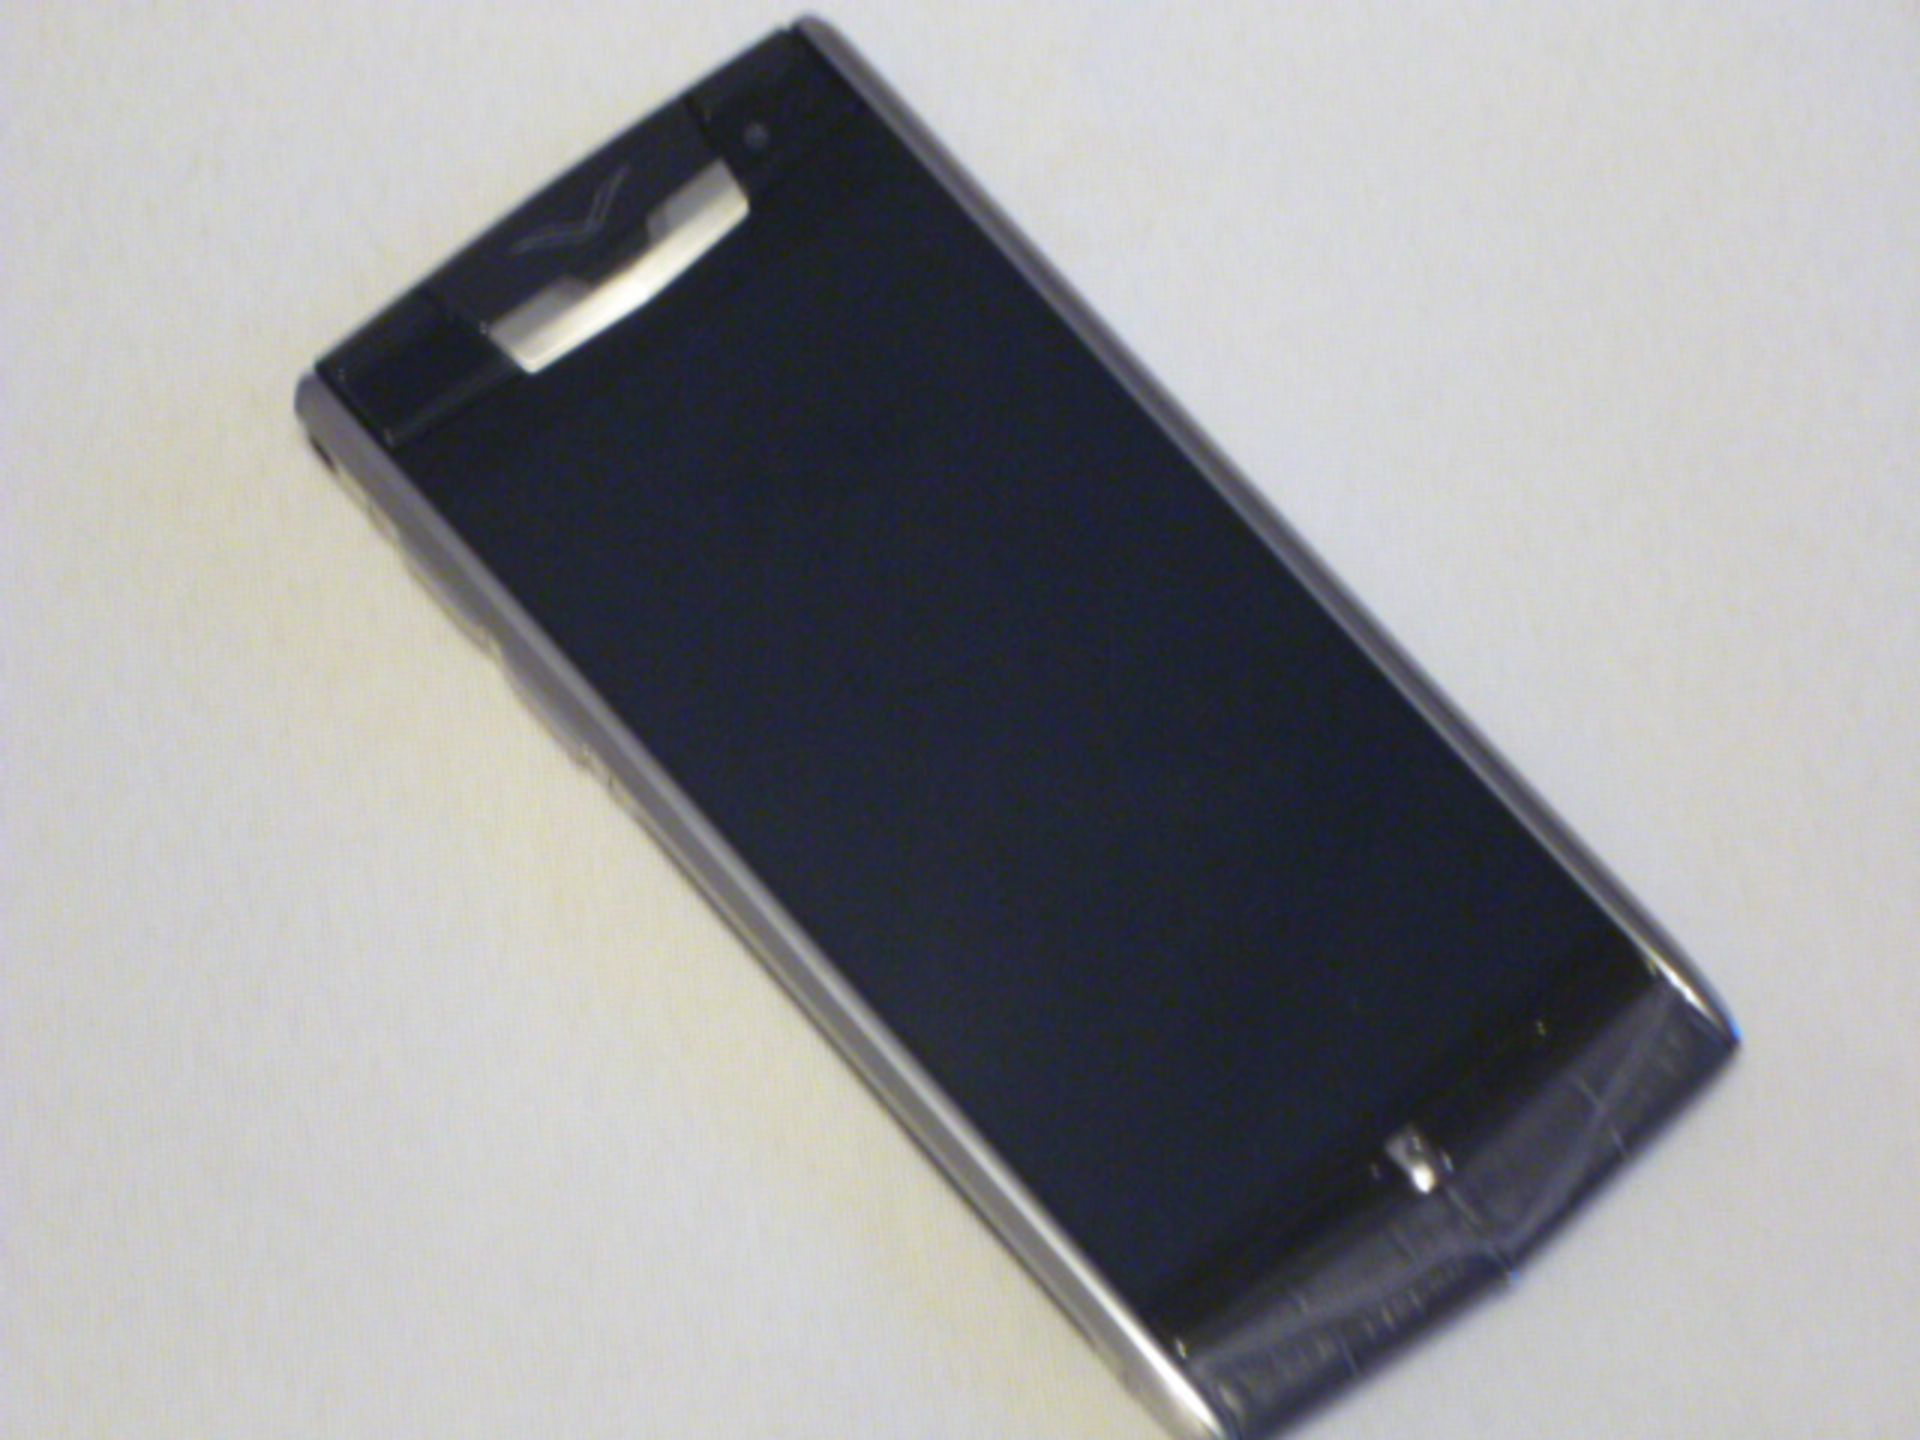 Vertu Signature Touch Phone with Grey Alligator, S/N EMX-006300. Comes with Sales Pack & Charging